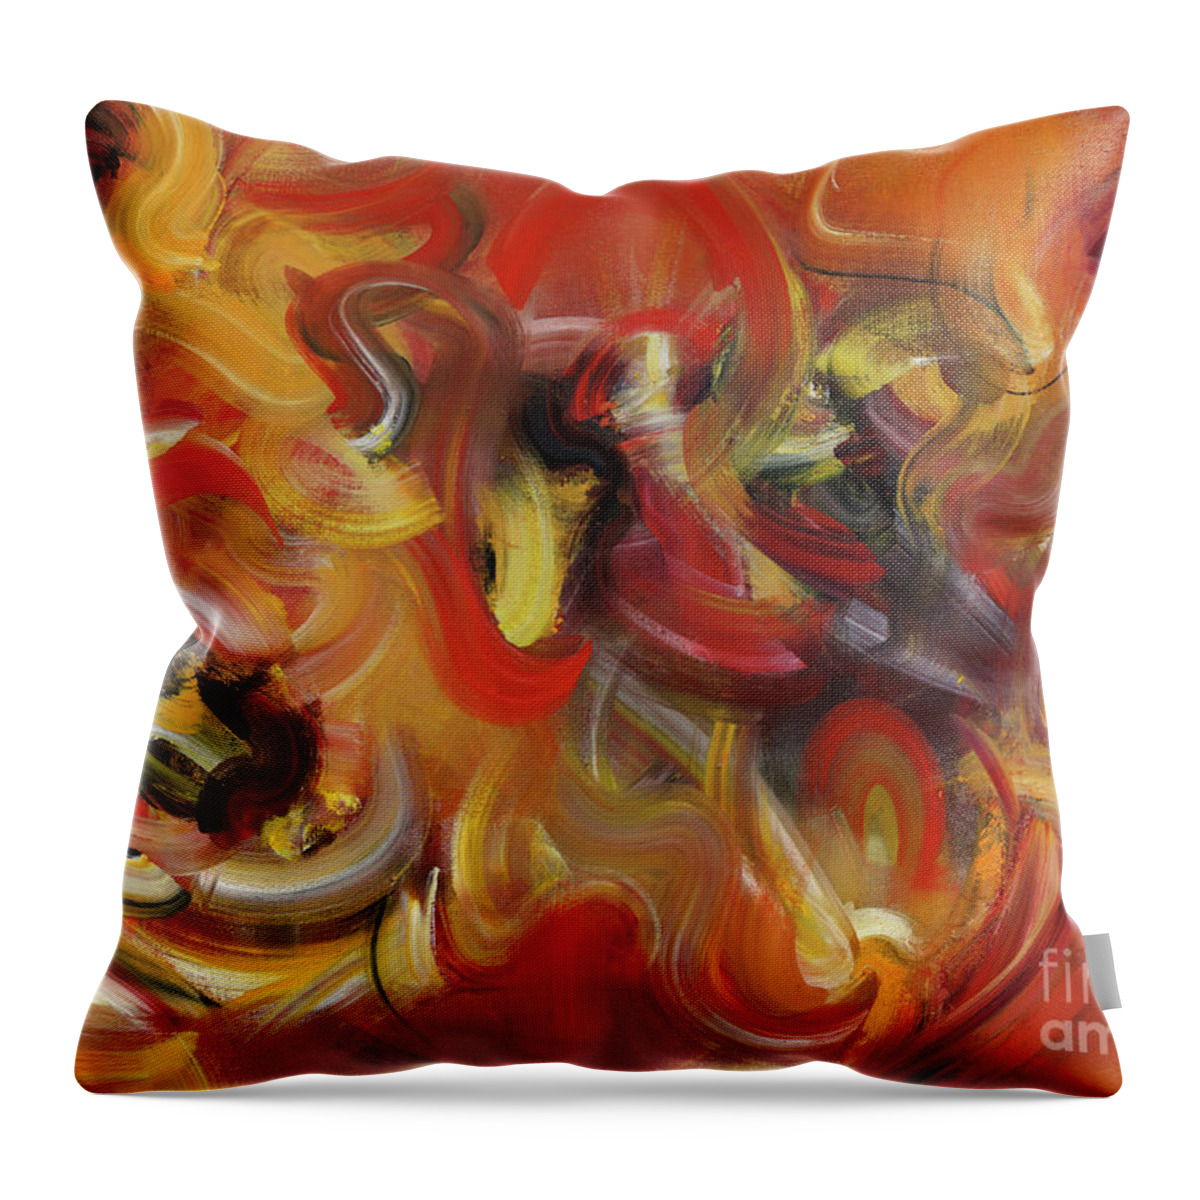 Oils Throw Pillow featuring the painting Abfackeln by Ritchard Rodriguez